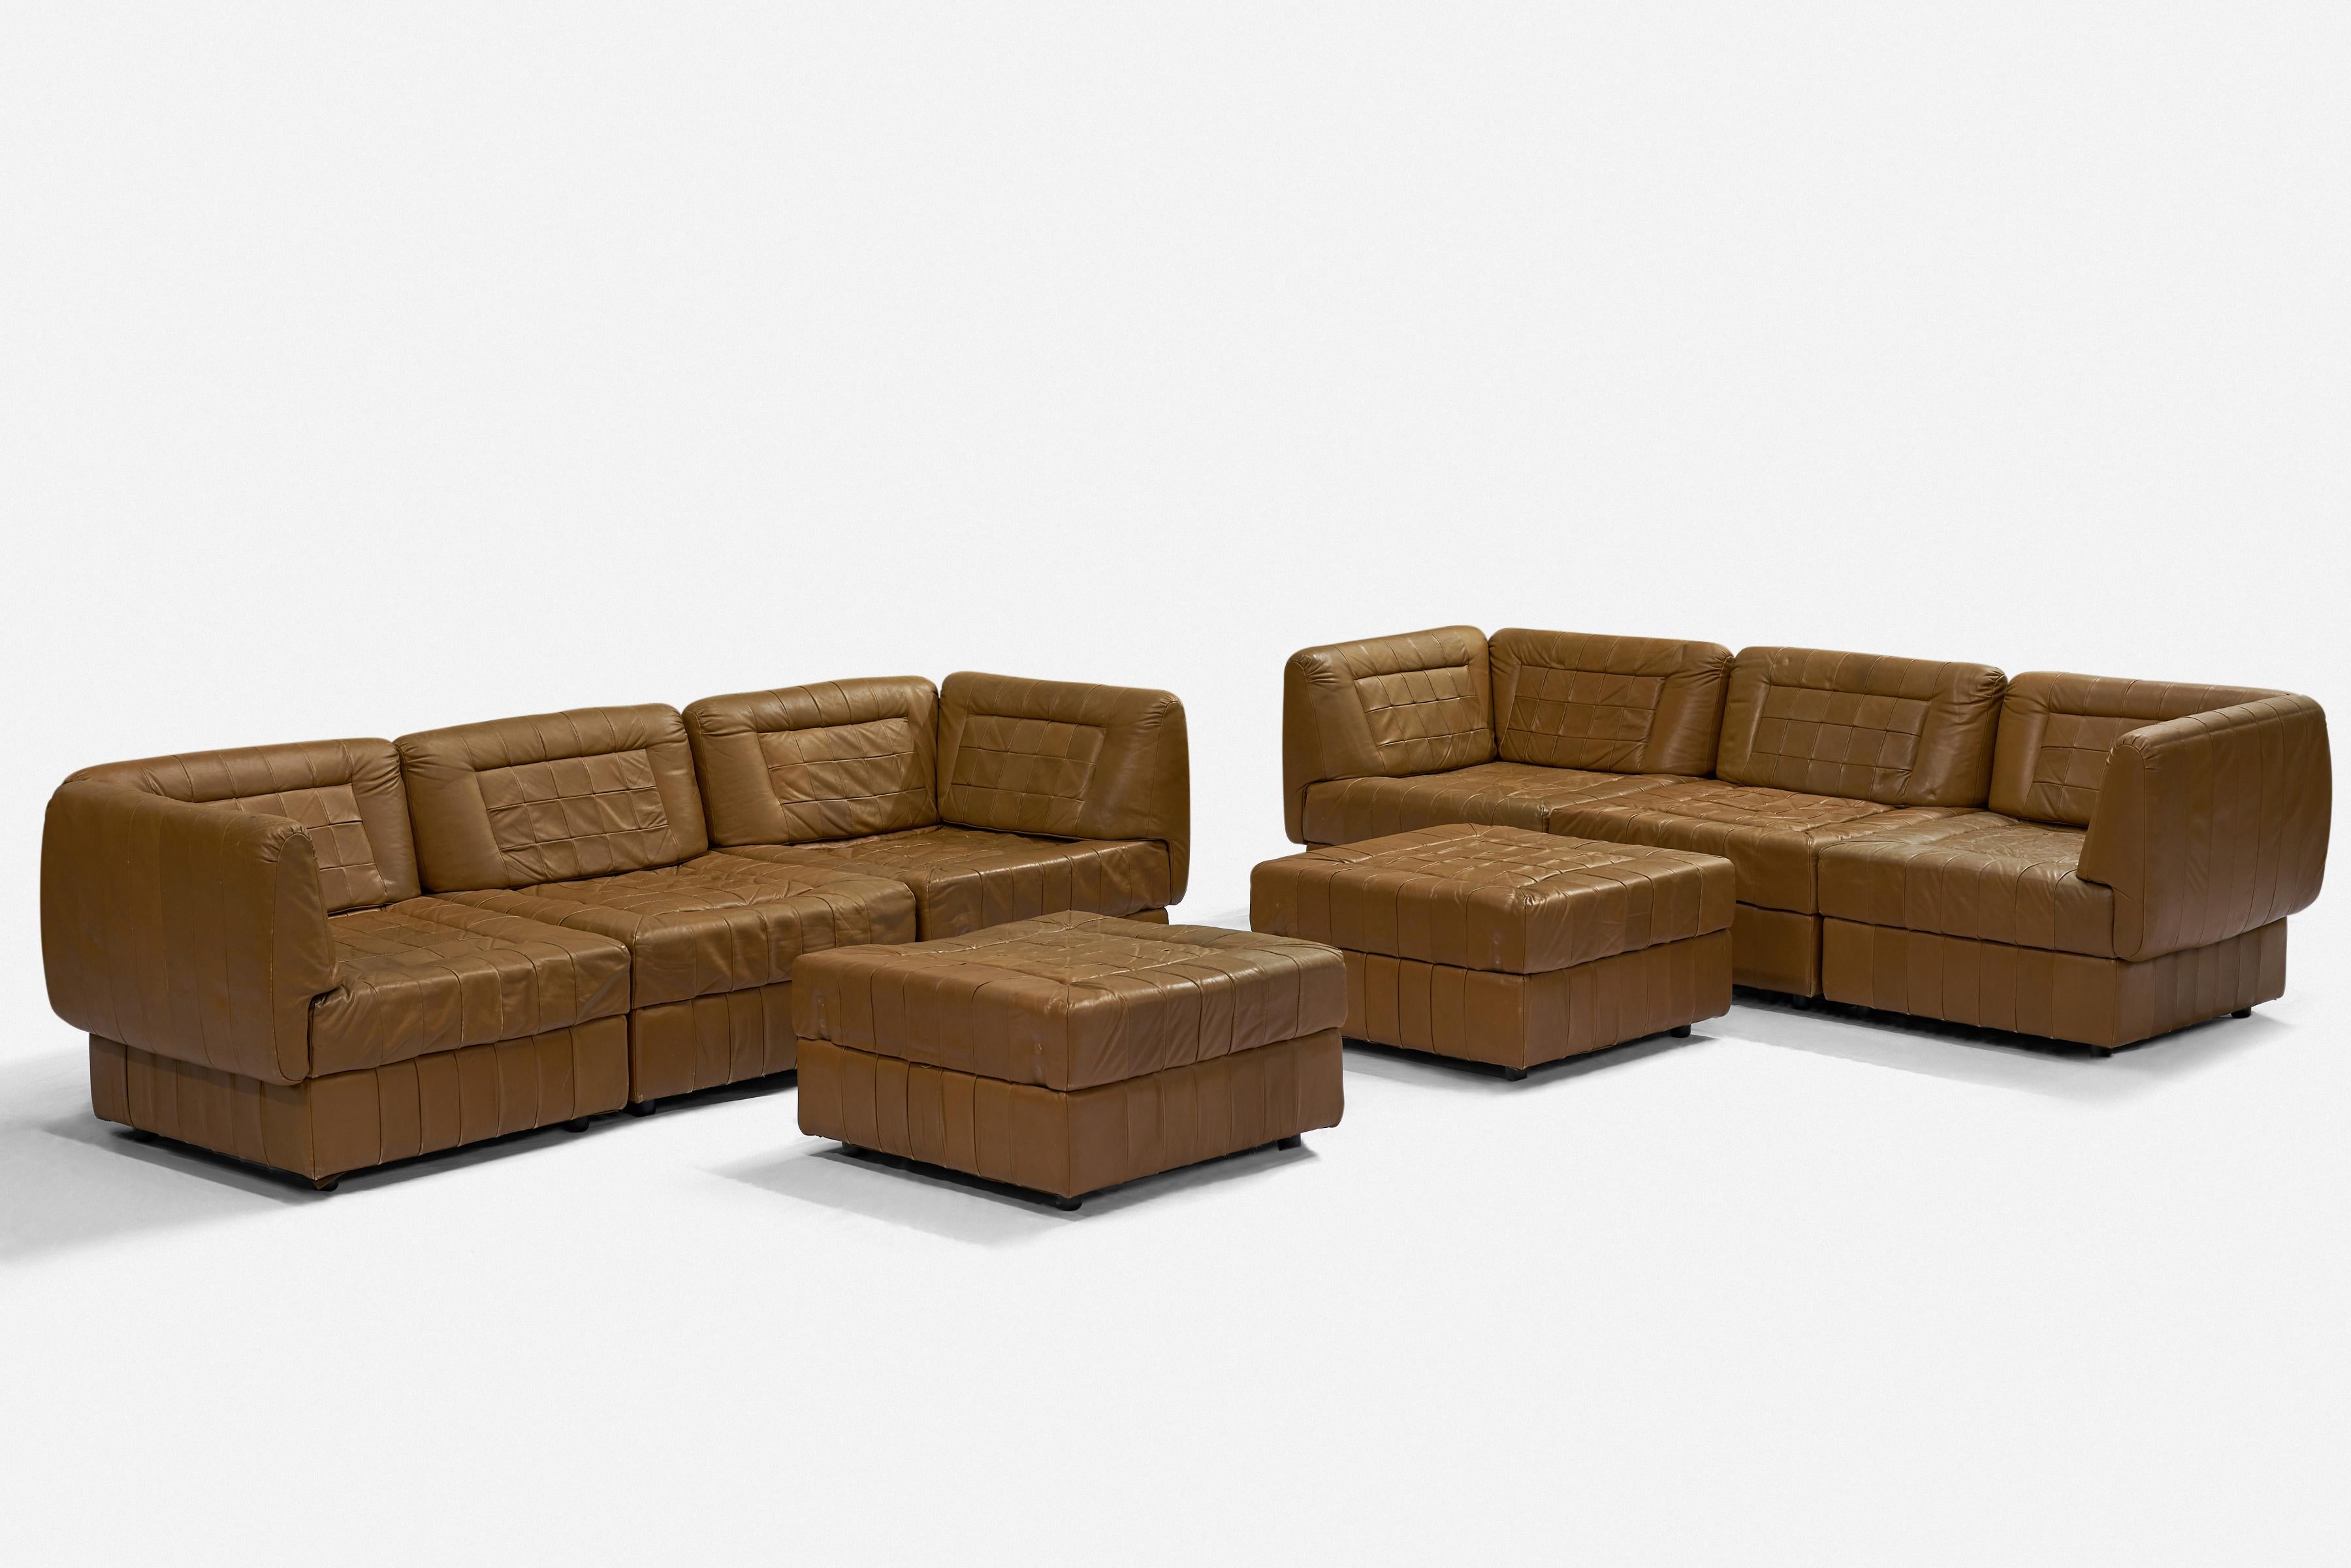 Patchwork Percival Lafer leather modular seating set For Sale